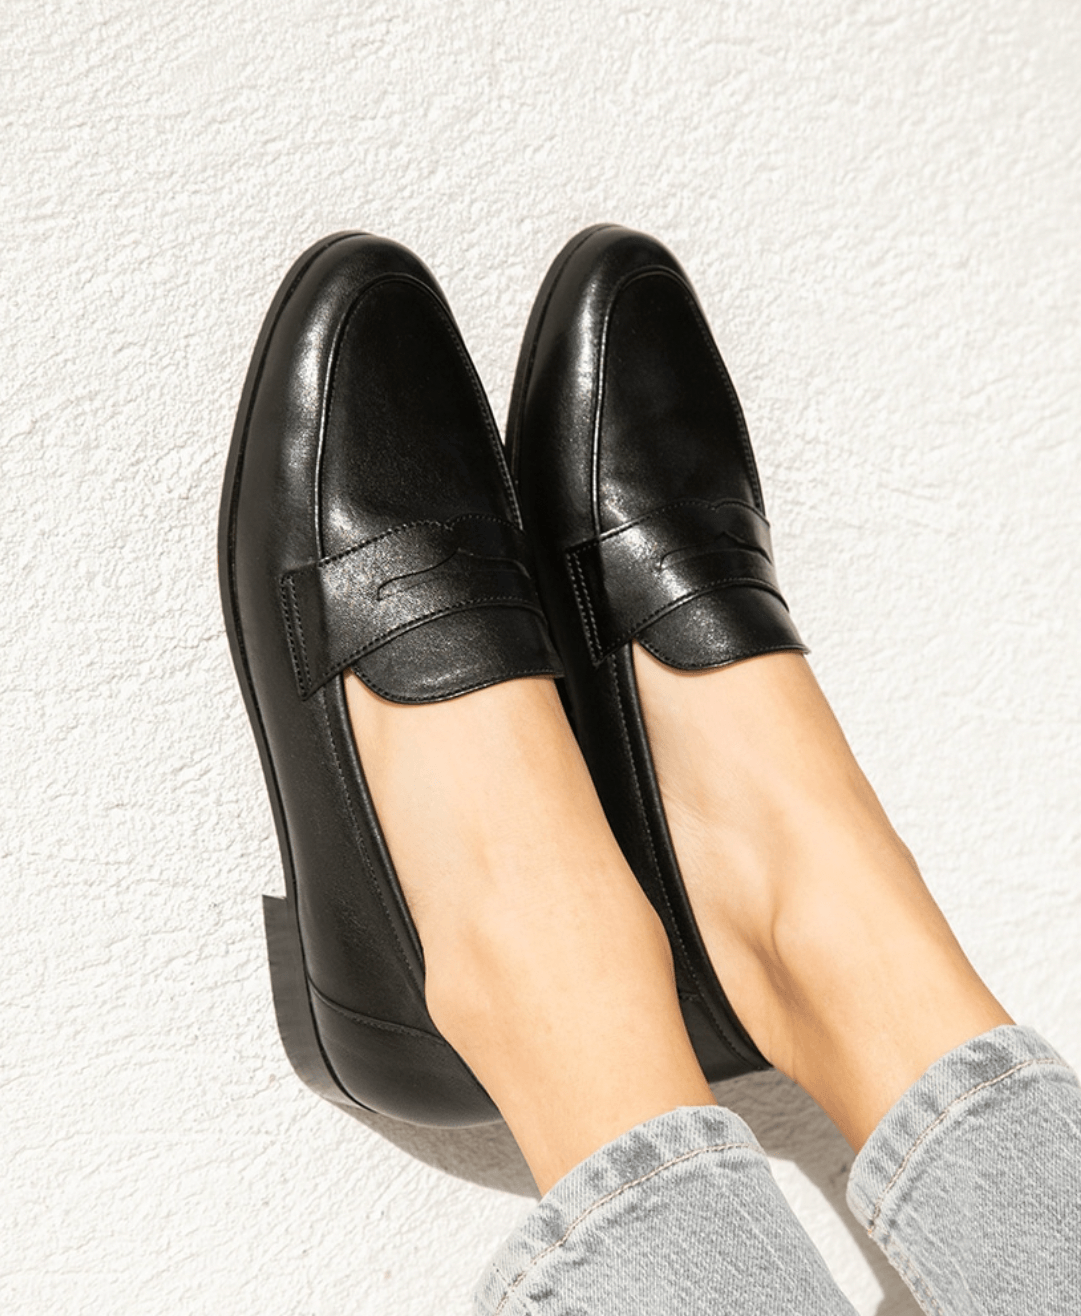 Maison Toufet Hanna black Loafer - MADE THE EDIT